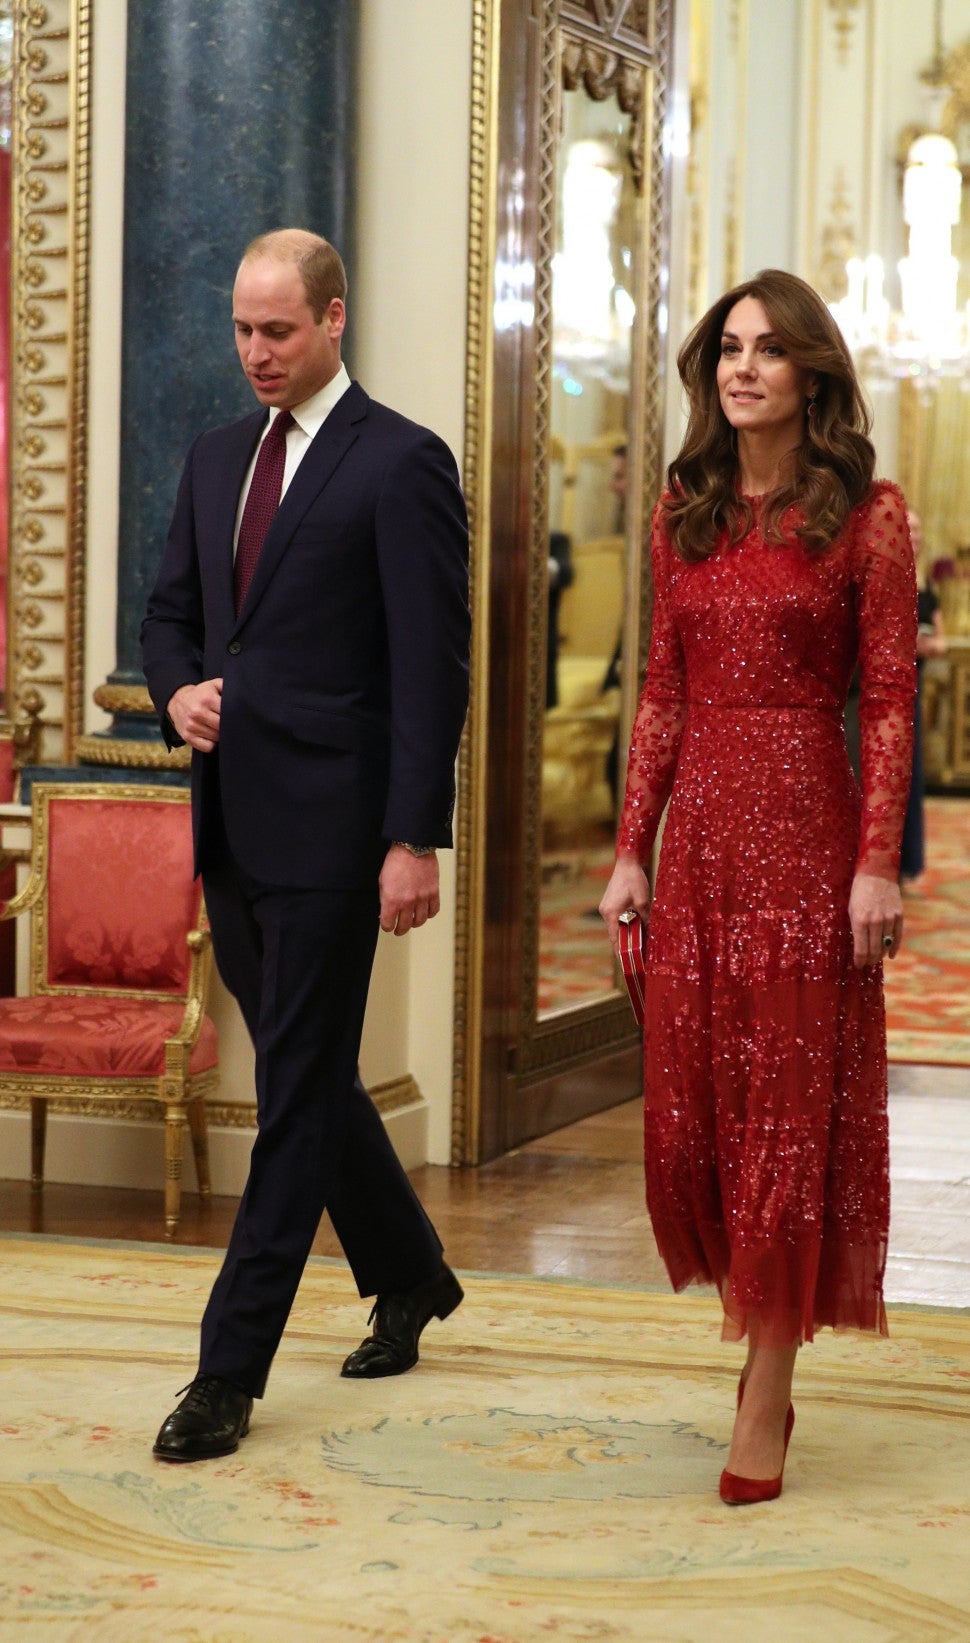 Prince William and Kate Middleton at the U.K.-Africa Summit reception.